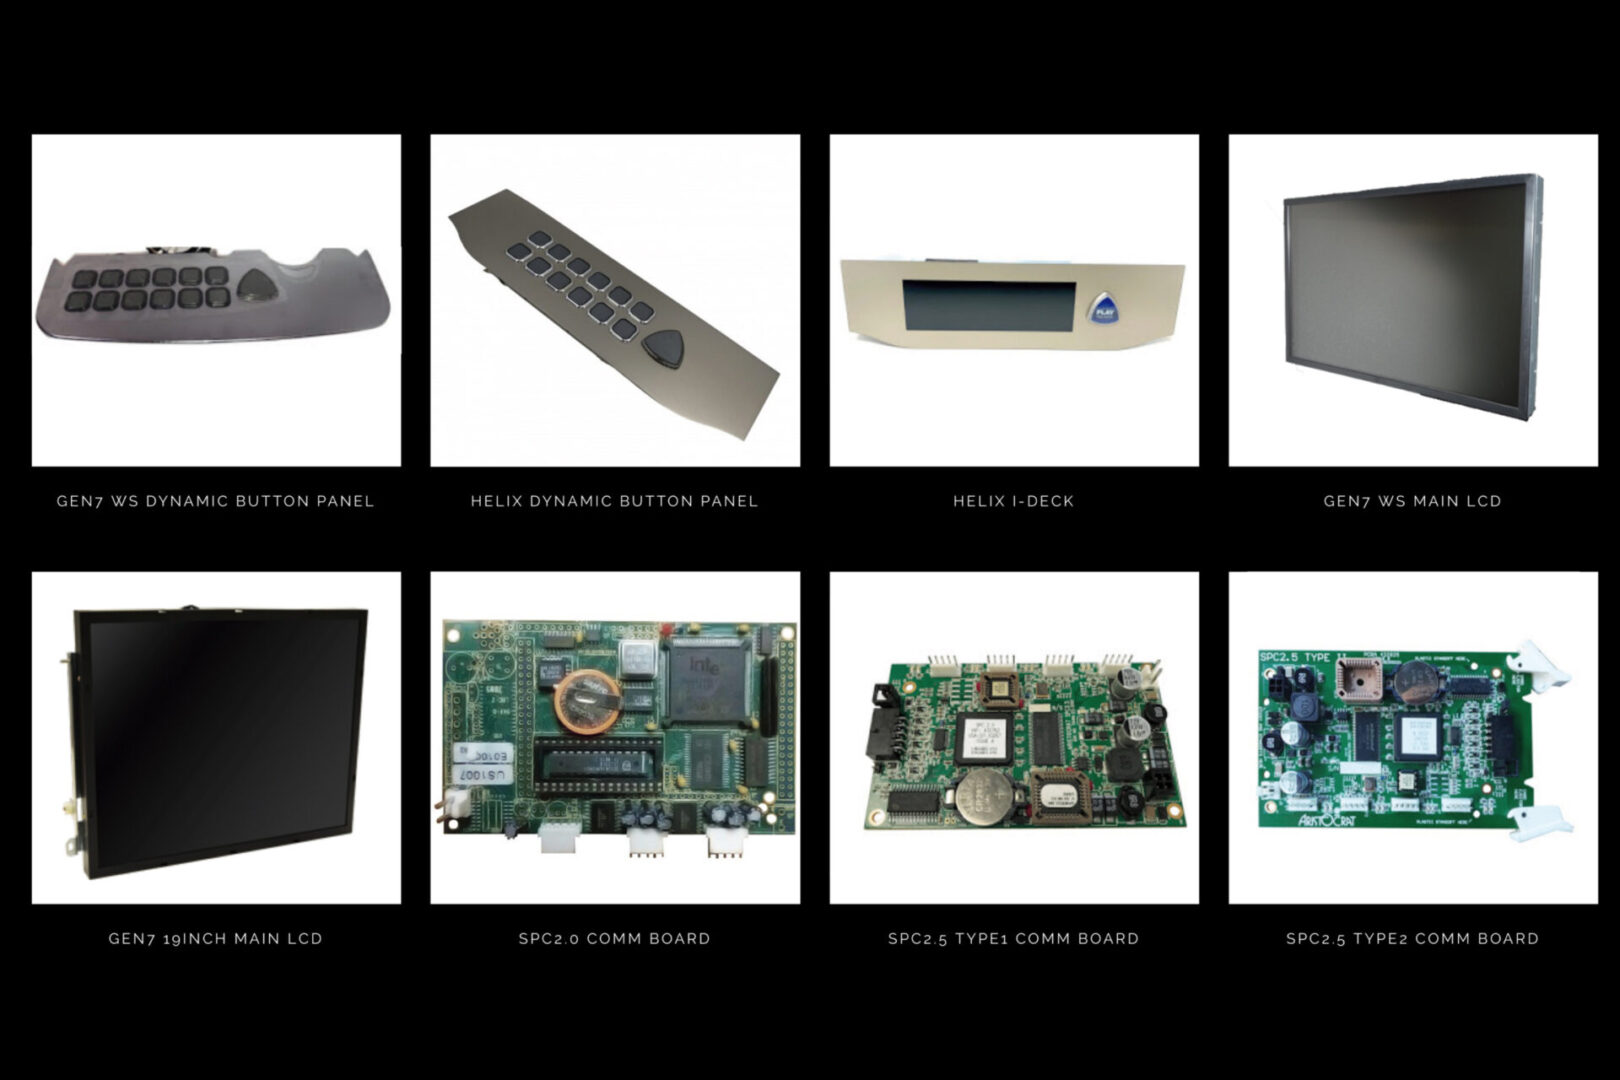 A series of pictures showing different types of electronic equipment.